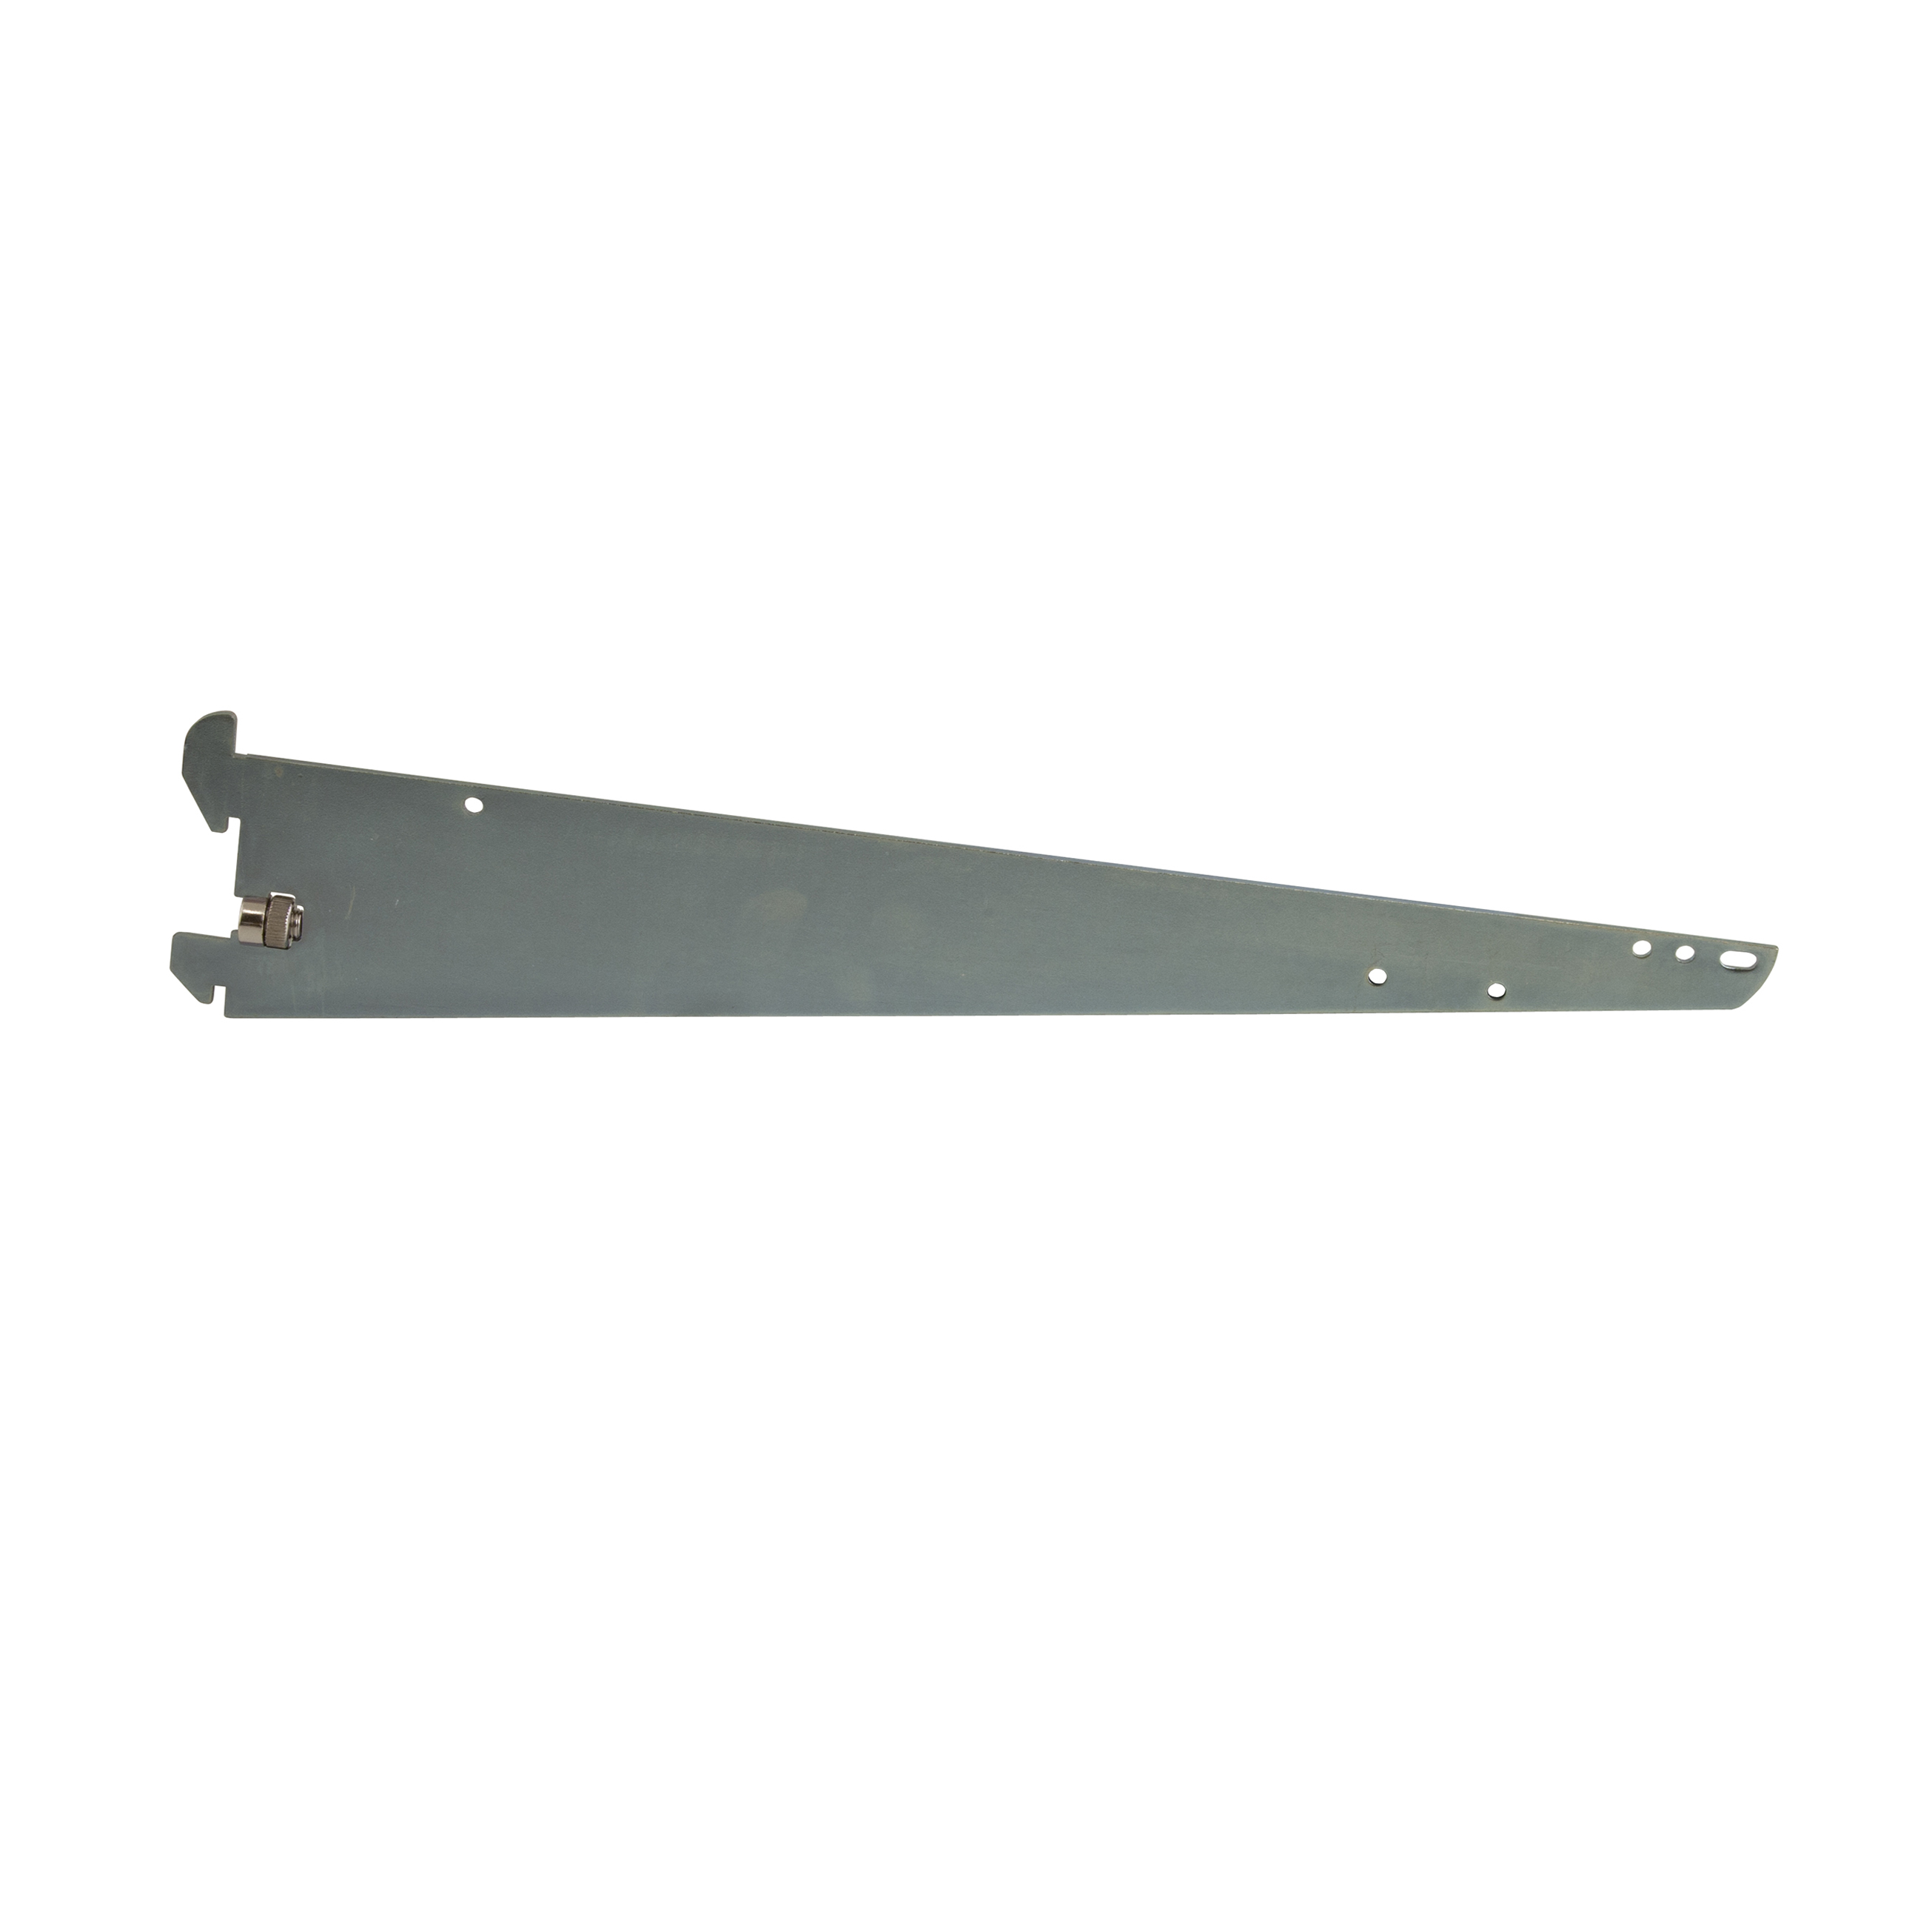 Shelf Brackets for Heavy Duty Slotted Wall Standards - Store Fixtures Direct